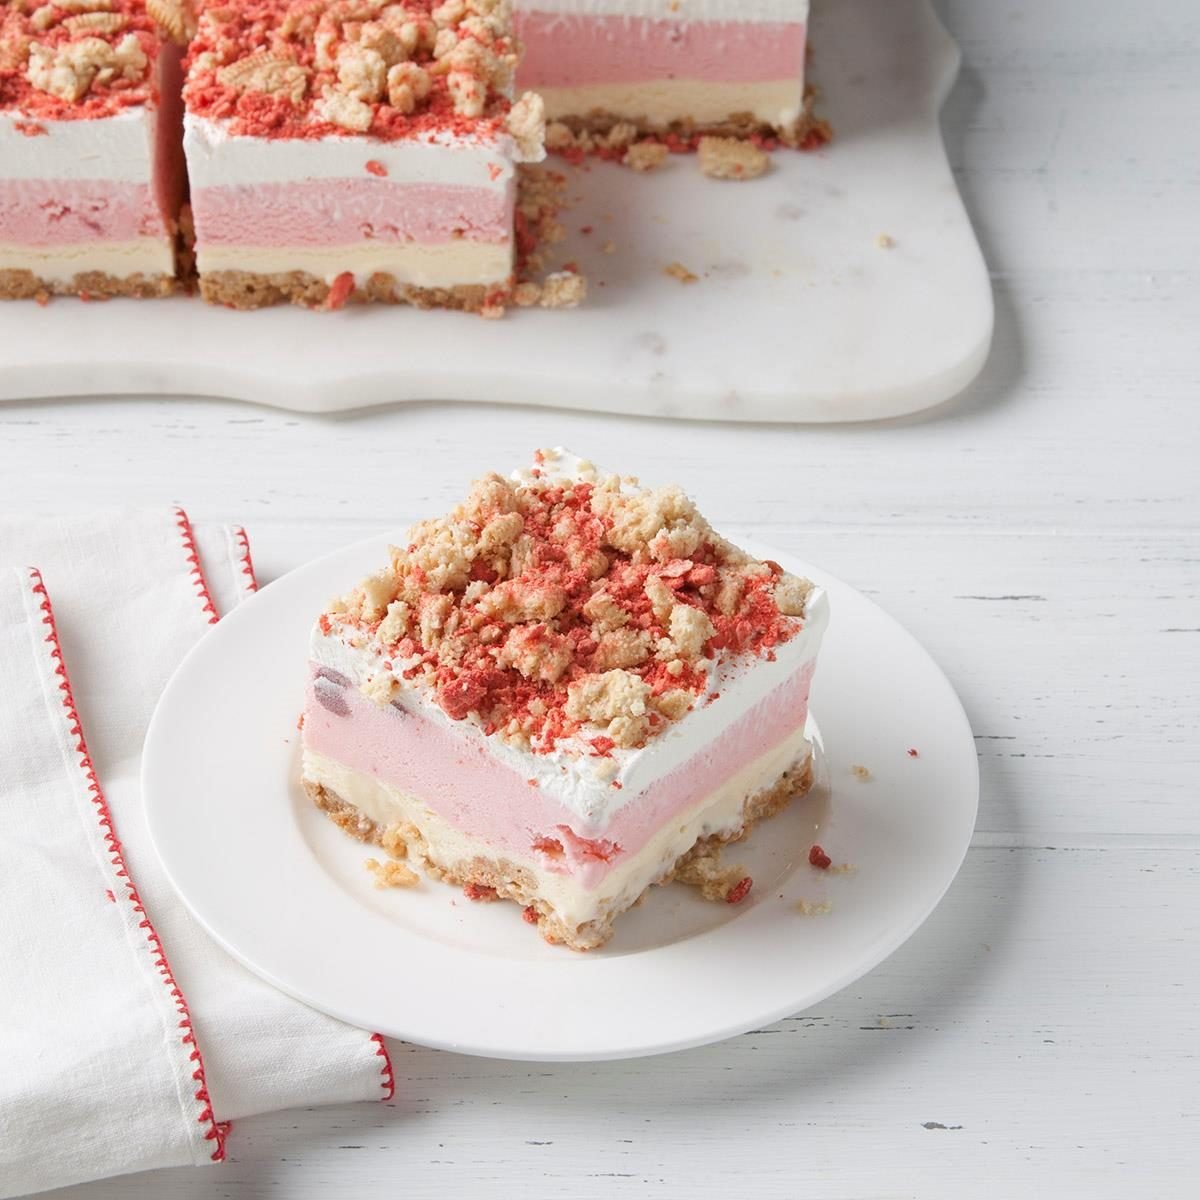 30 Ice Cream Cakes You'll Want to Make All Summer Long